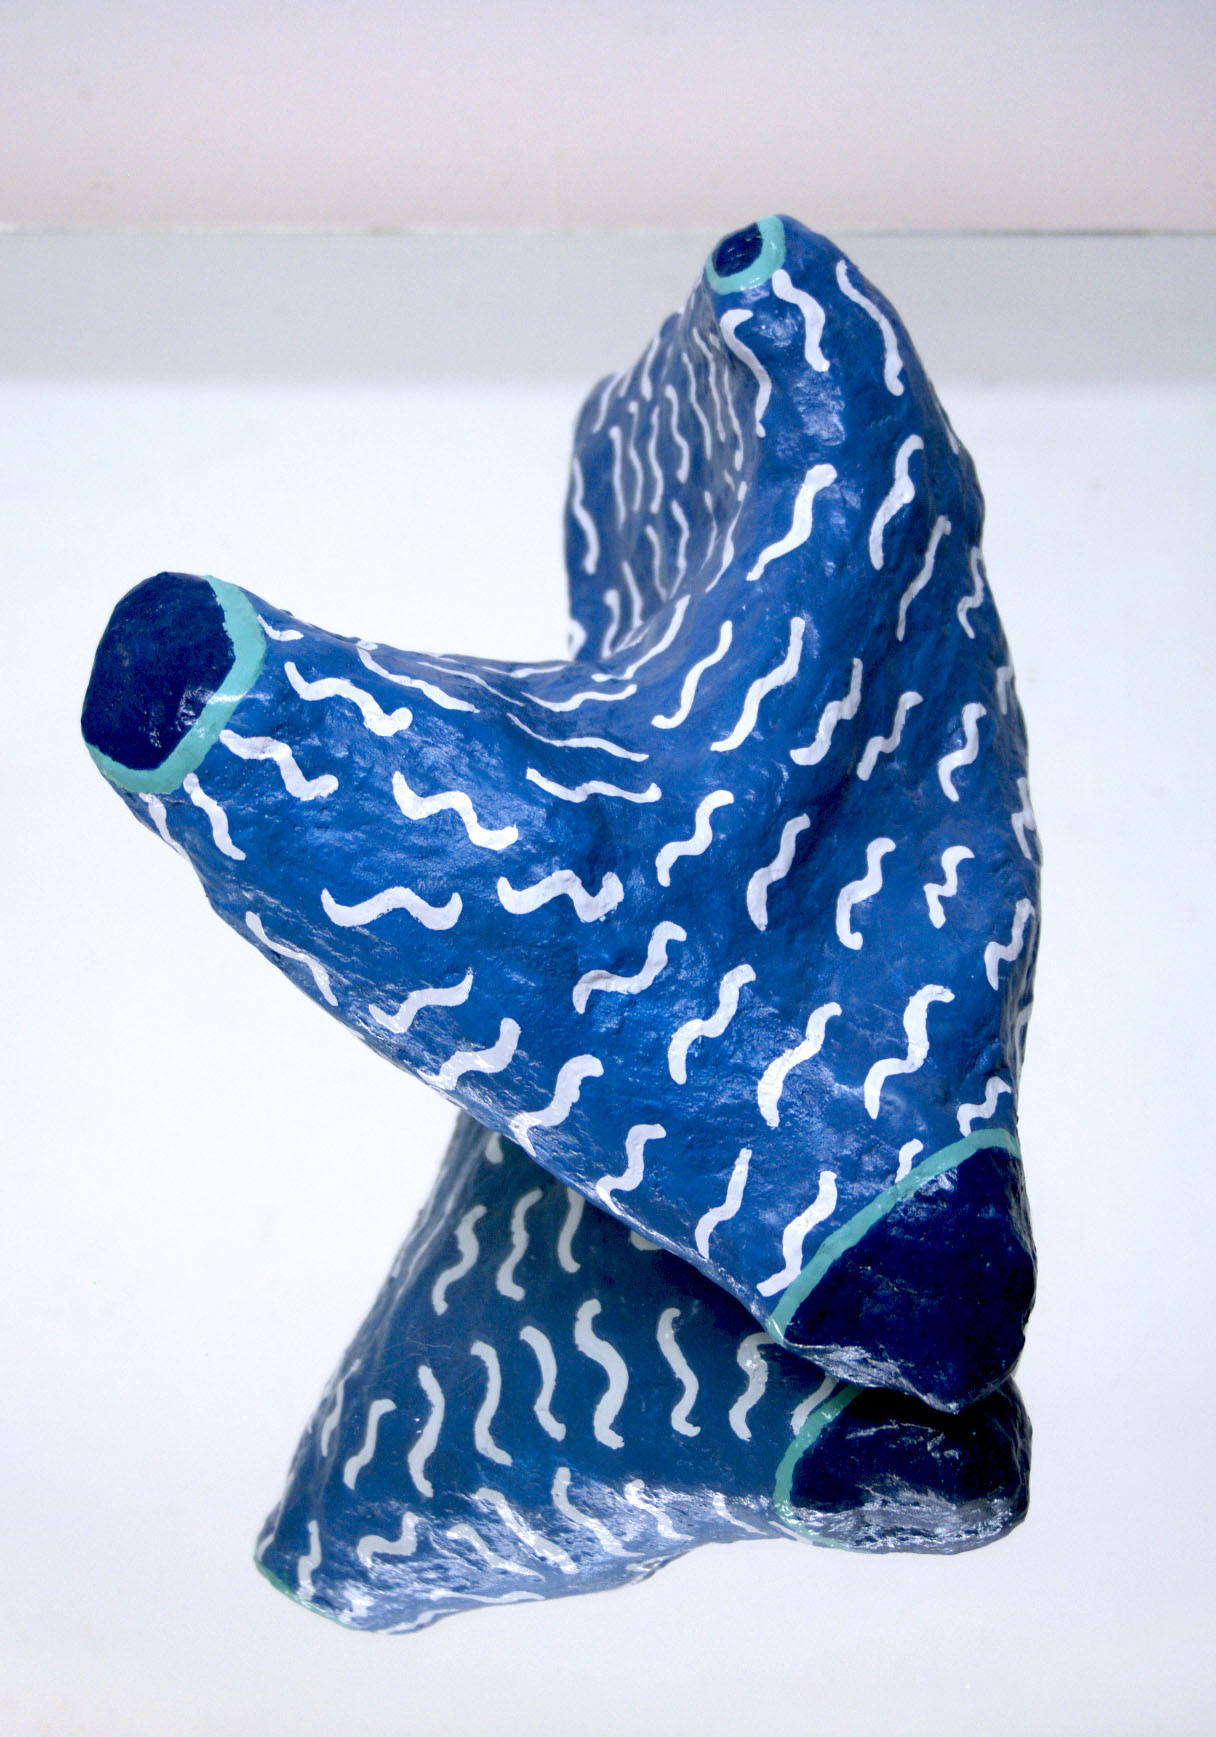 A blue hydrocal abstract shaped sculpture with white squiggly lines and dark blue tips sitting on a mirror